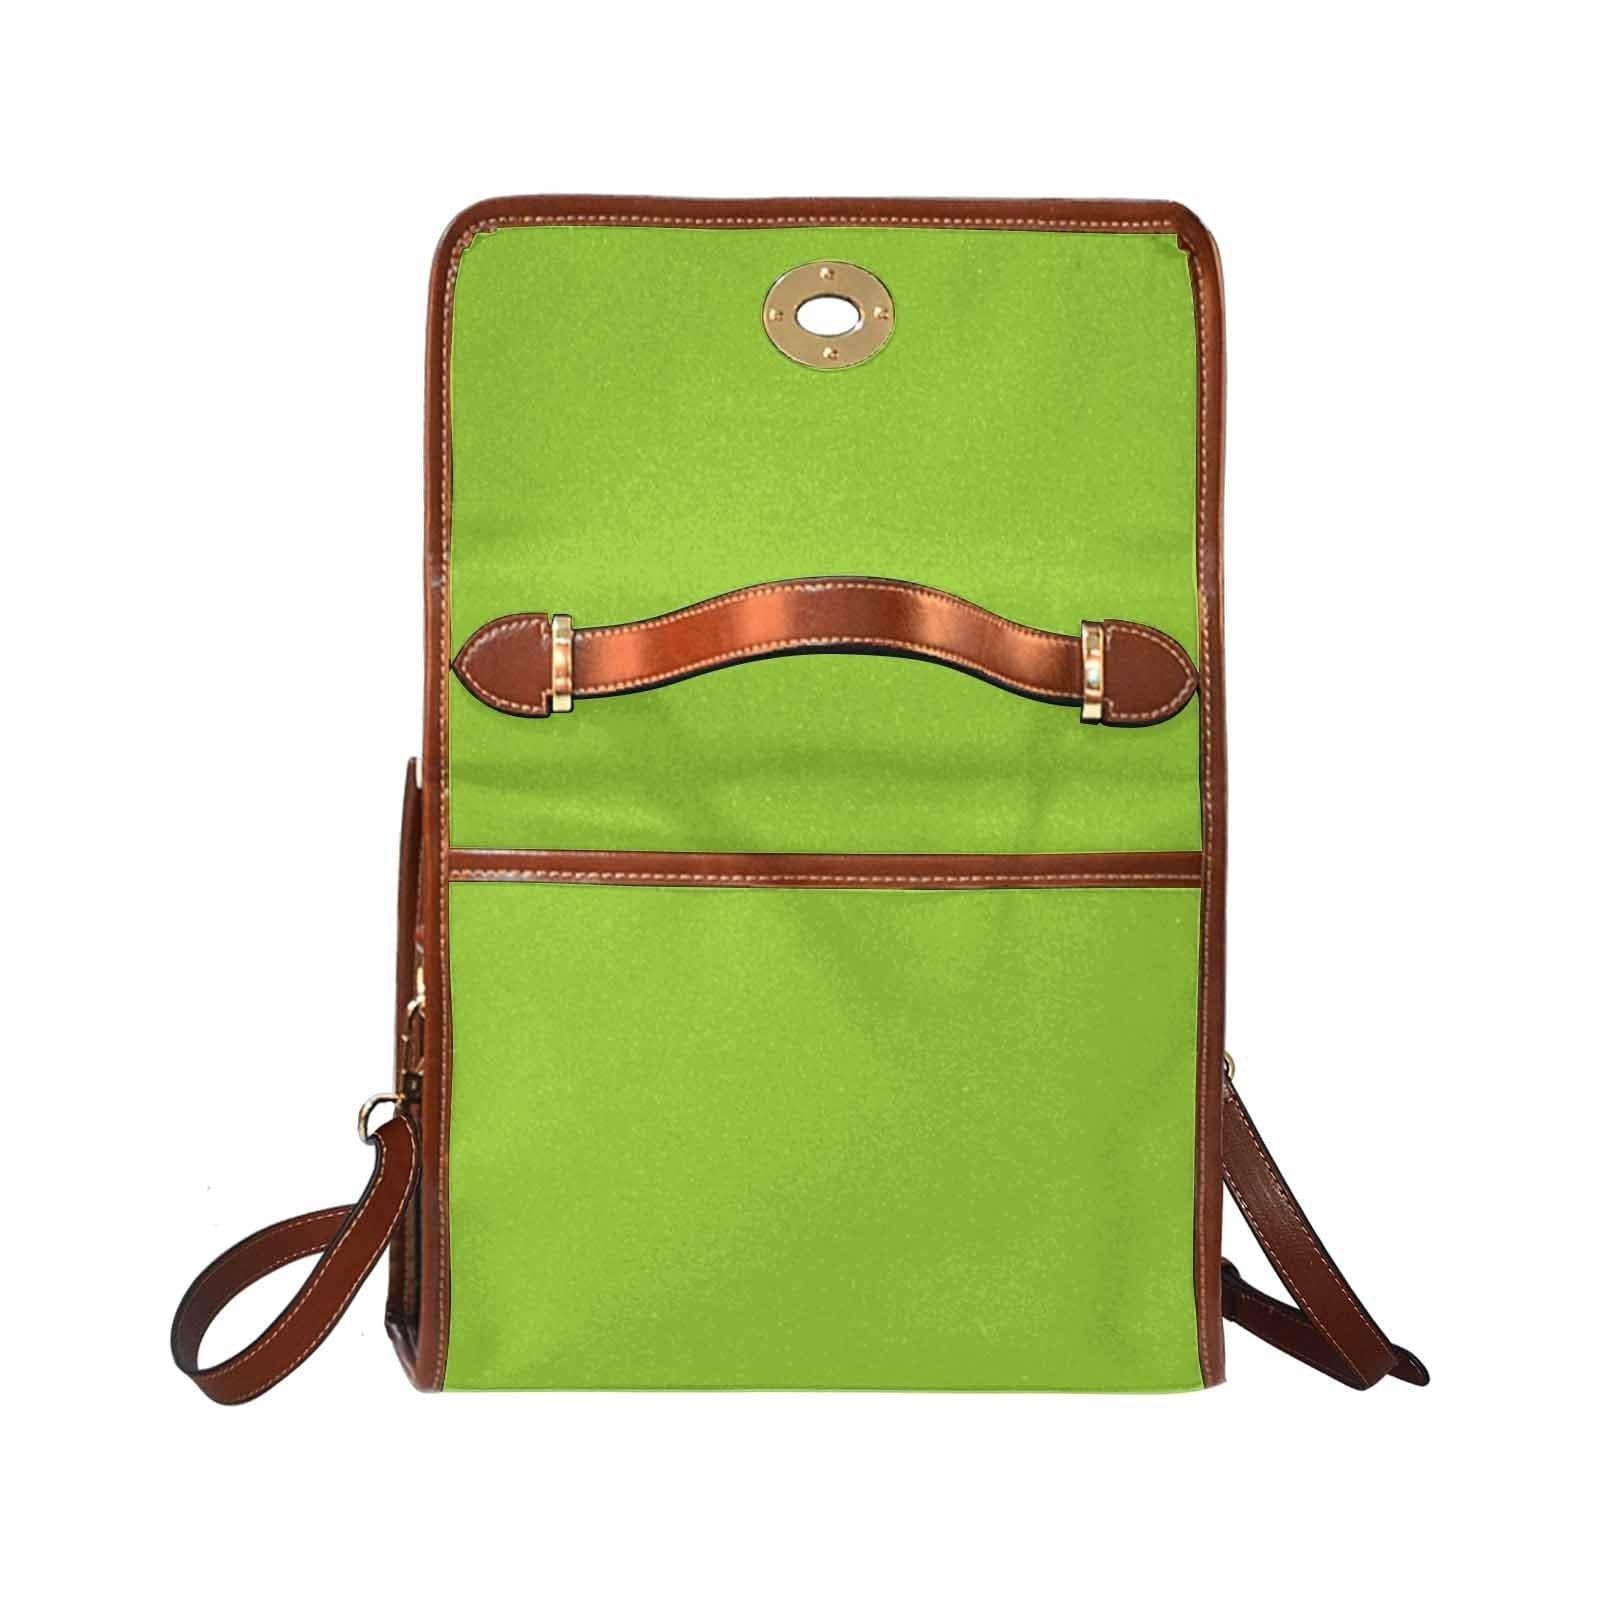 Uniquely You | iAA Bags | Handbags One Size Uniquely You Canvas Bag  / Yellow Green   (Brown Strap)